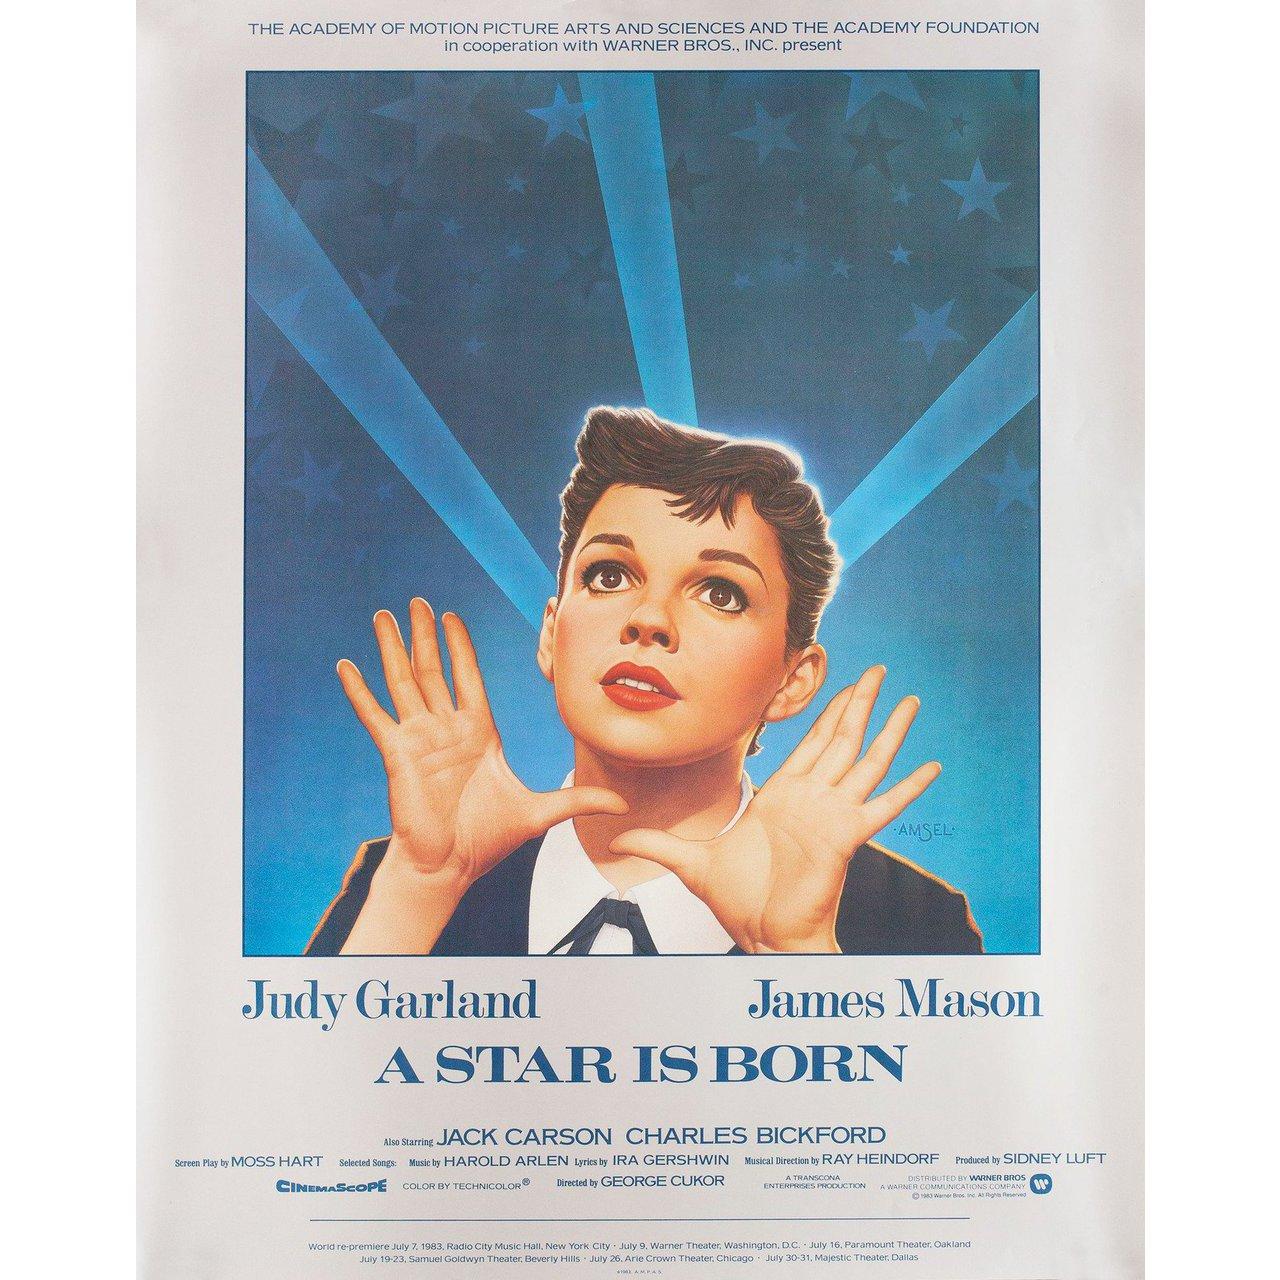 Original 1983 re-release U.S. poster by Richard Amsel for the 1954 film A Star Is Born directed by George Cukor with Judy Garland / James Mason / Jack Carson / Charles Bickford. Fine condition, rolled. Please note: the size is stated in inches and